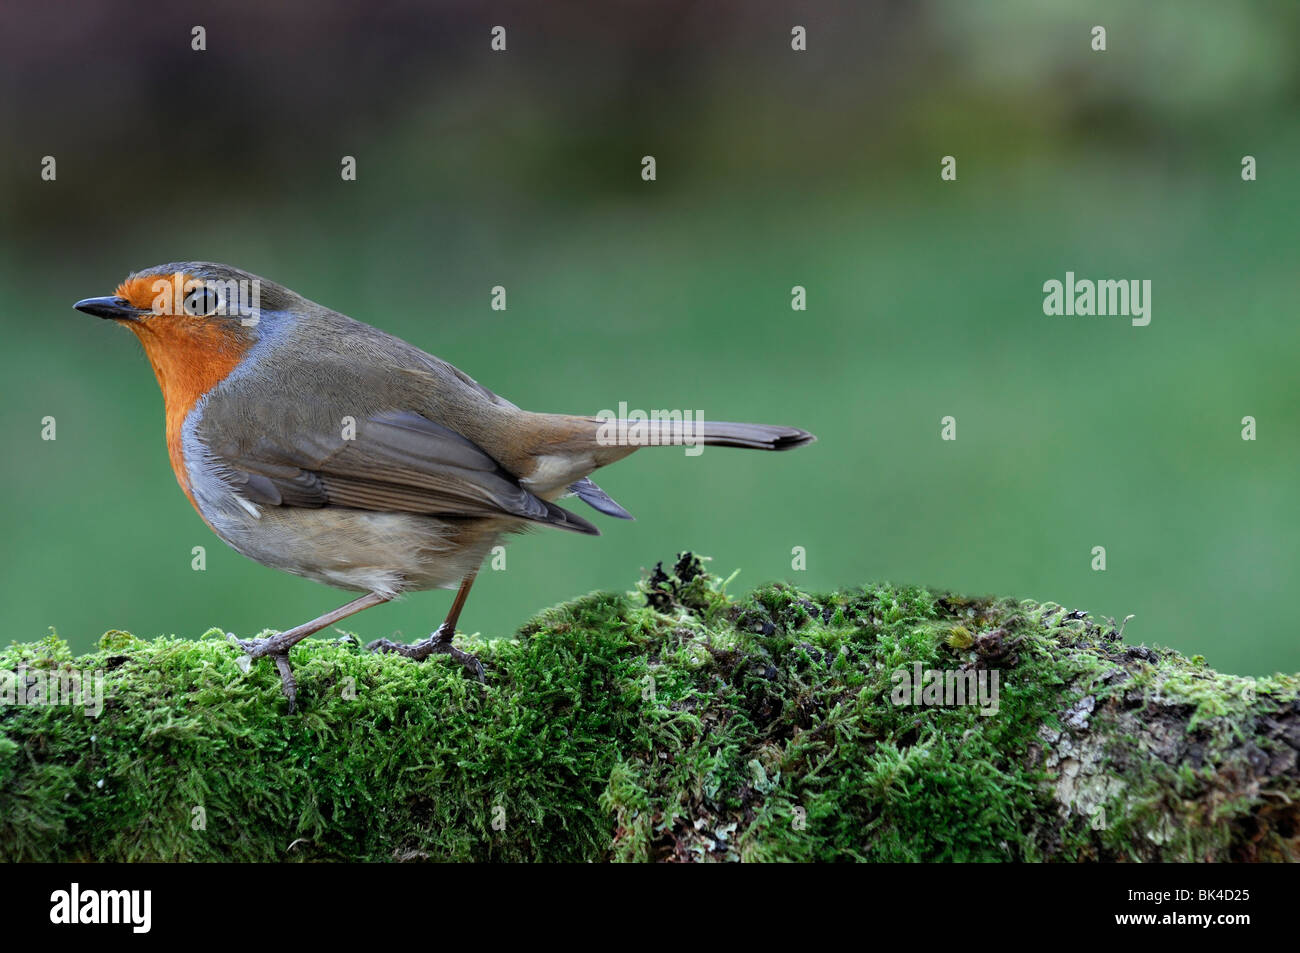 Erithacus Rubecula robin redbreast bird standing perched perch looking moss lichen cover covered branch garden cautious wildlife Stock Photo